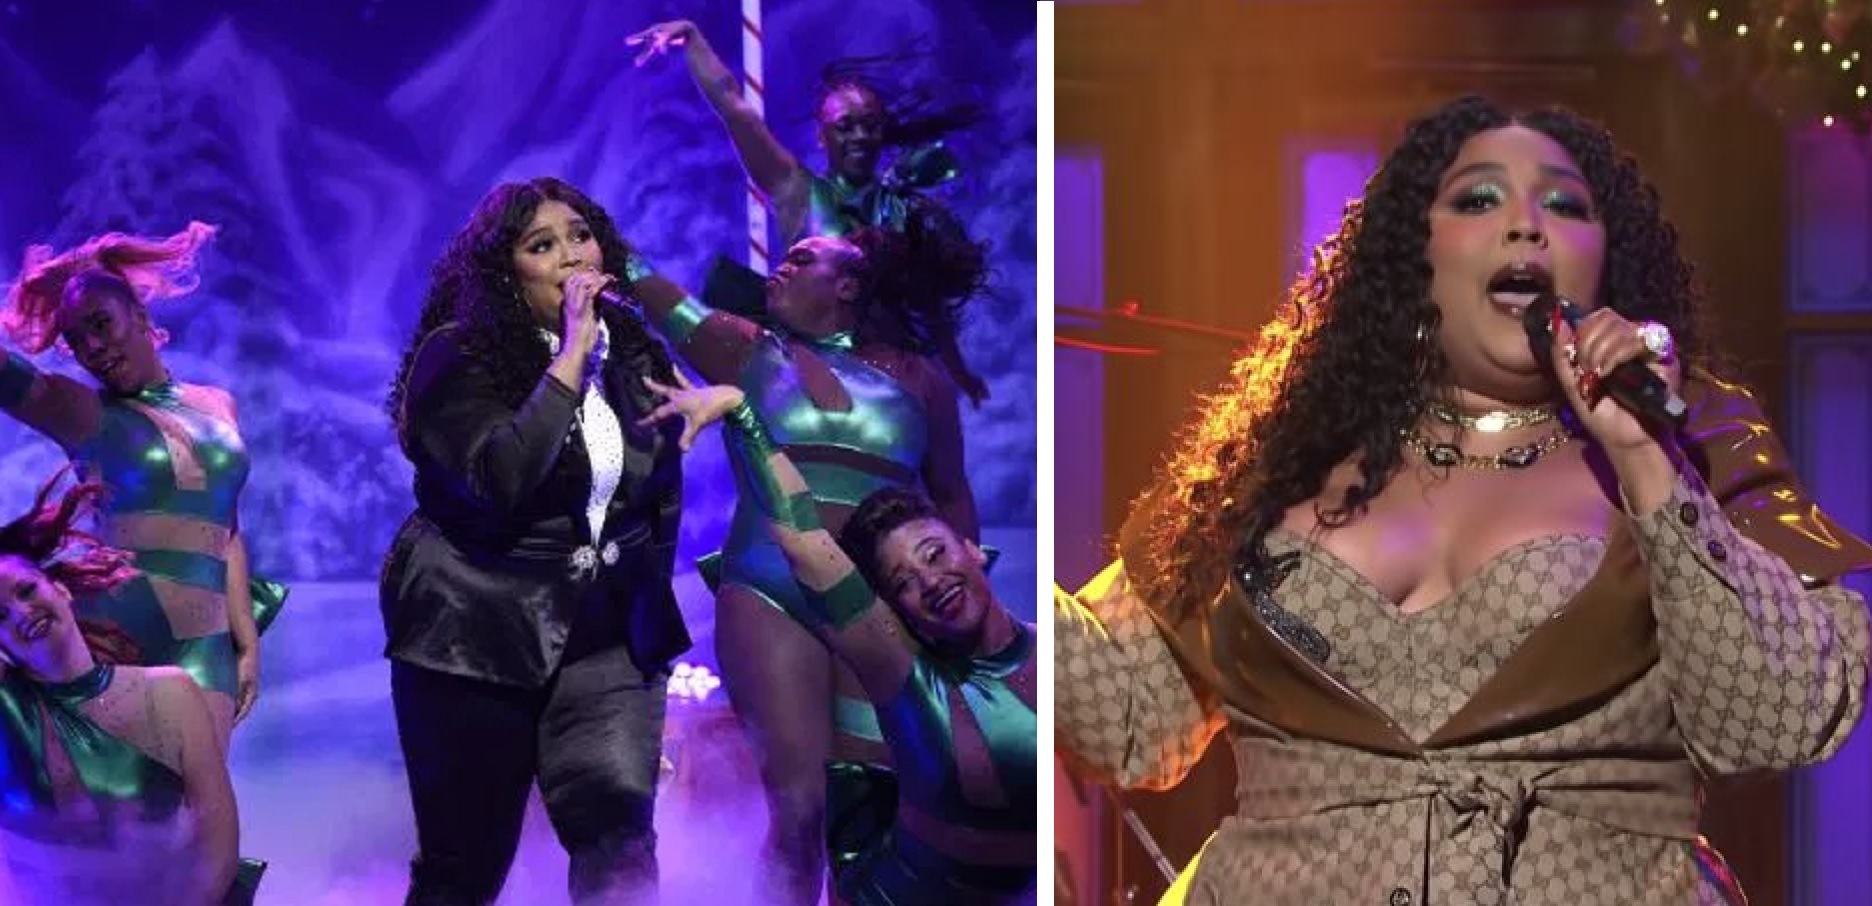 Watch: Lizzo Nails Her SNL Debut With ‘Truth Hurts’ & ‘Good As Hell’